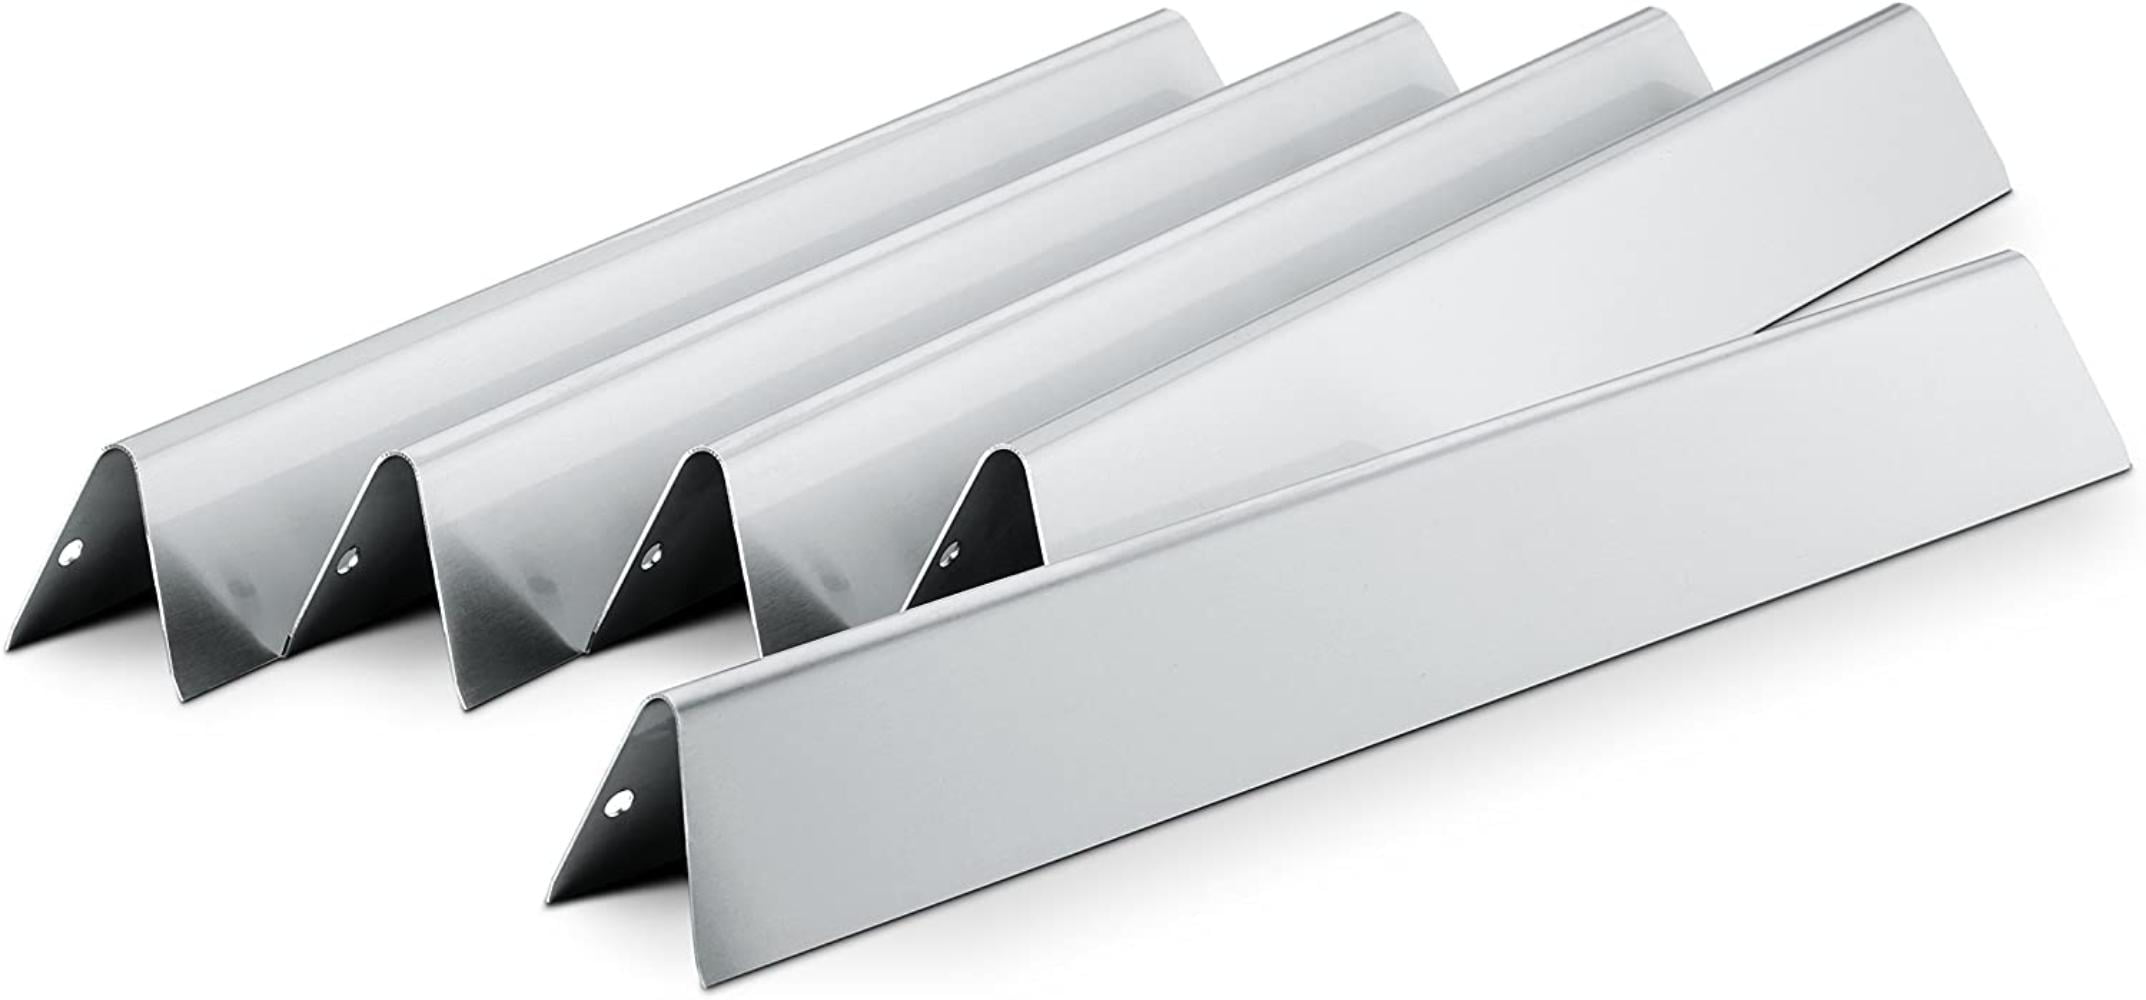 RiversEdge Products Stainless Flavorizer Bars 7537 22.5 65903 20 Gauge Set of 5 